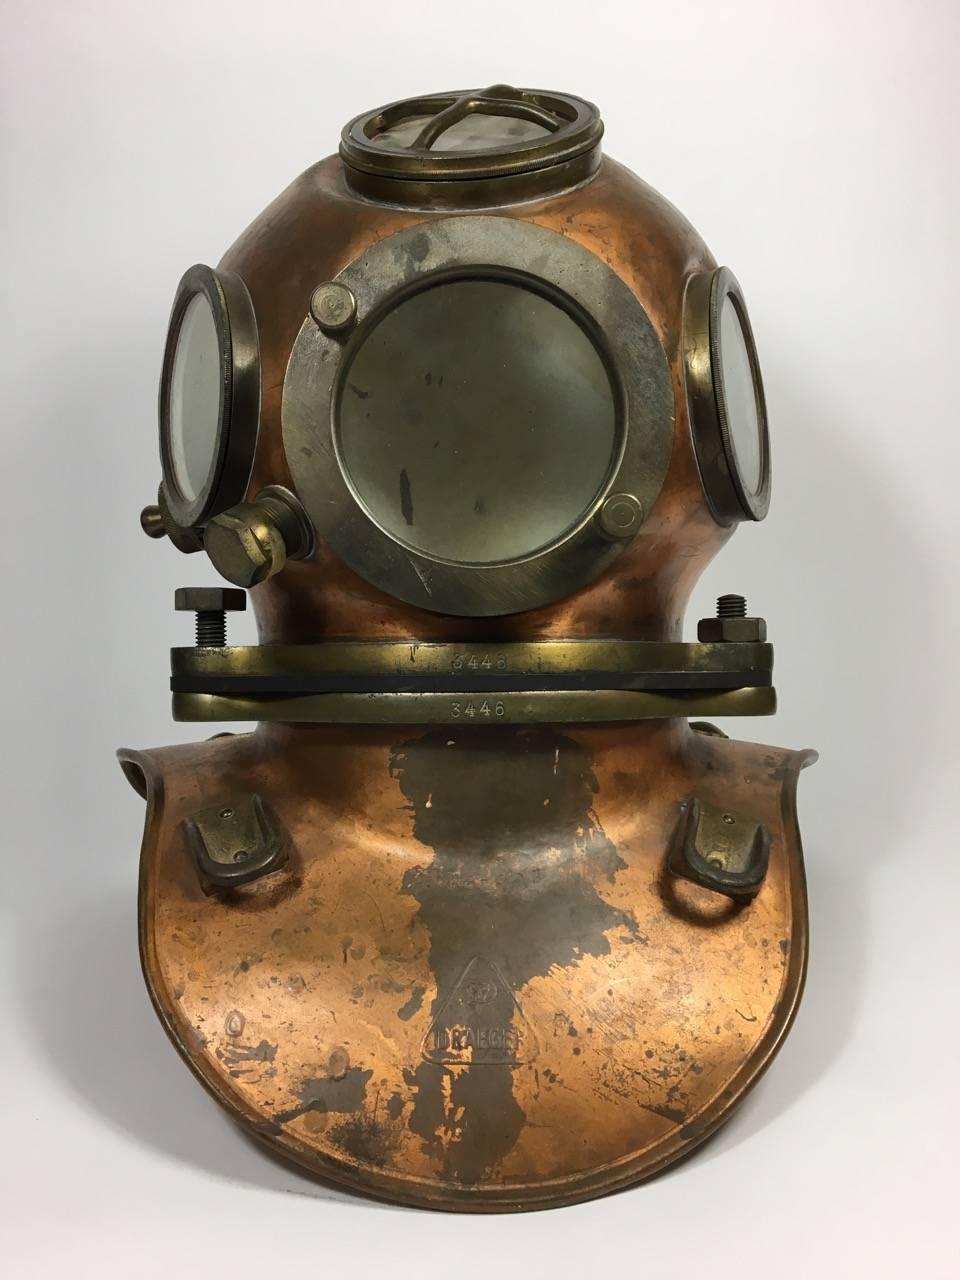 A mid-20th century diving helmet from the Draeger Company of West Germany, they are still among the world leaders in diving apparatus, and other fields requiring respiration devices. It has the top-mounted carrying handle that Draeger added to their